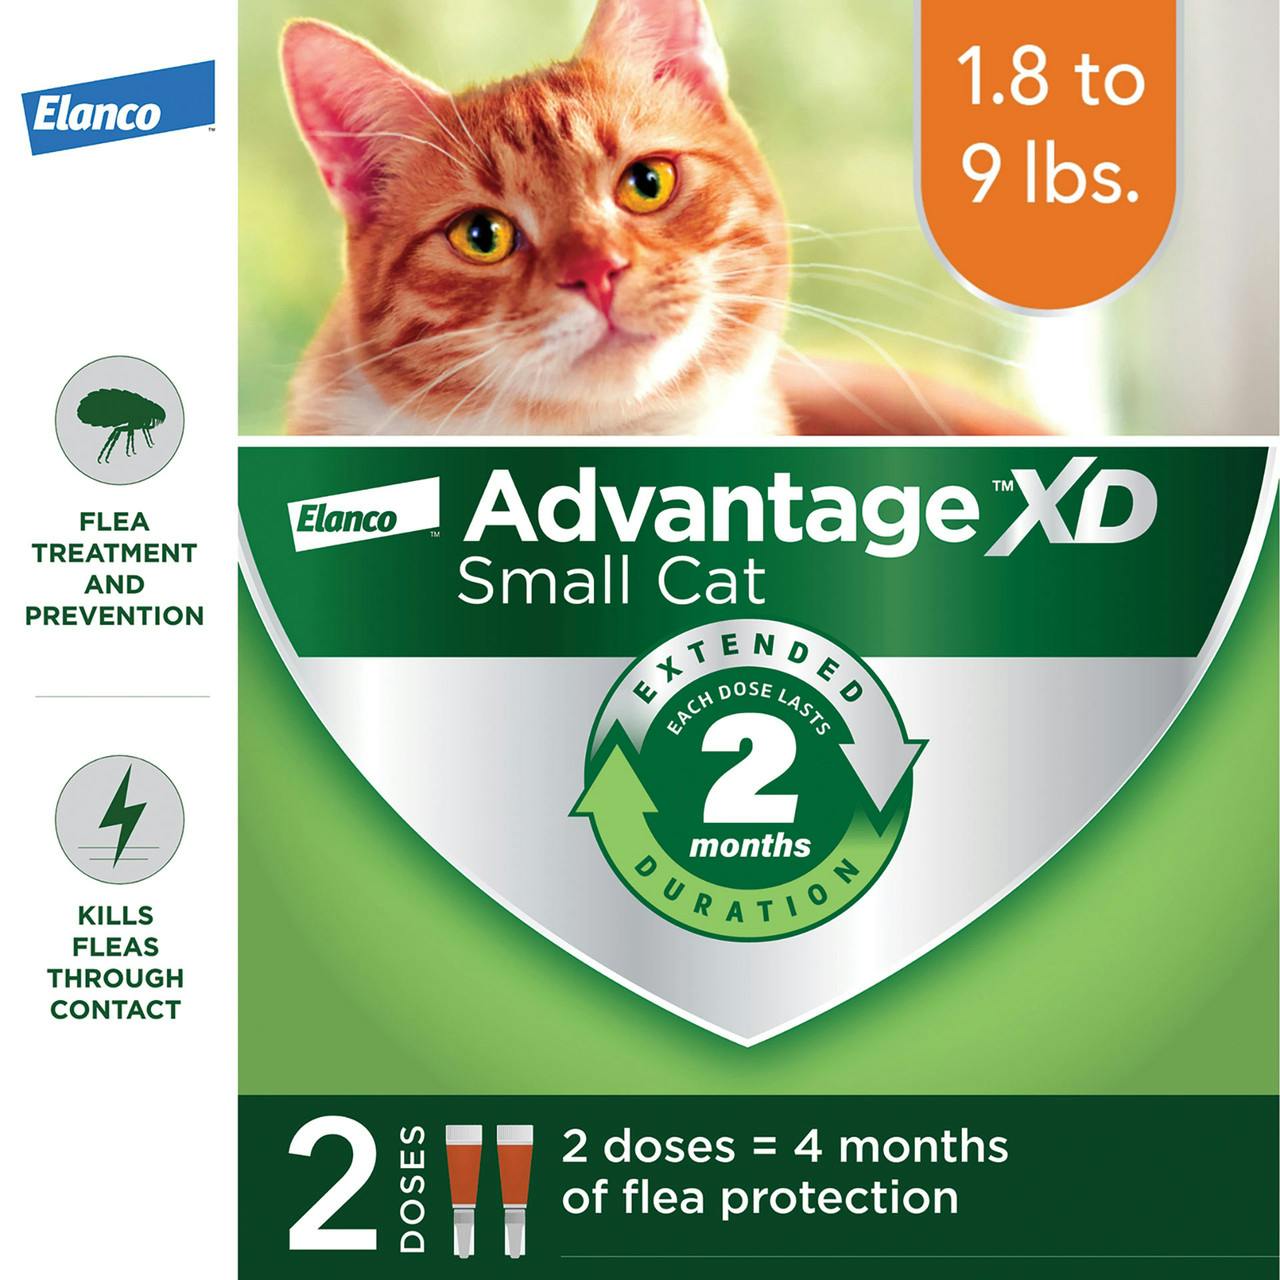 An green label that reads "Advantage XD Small Cat" with an image of a cat. It says "2 doses = 4 months of flea protection.